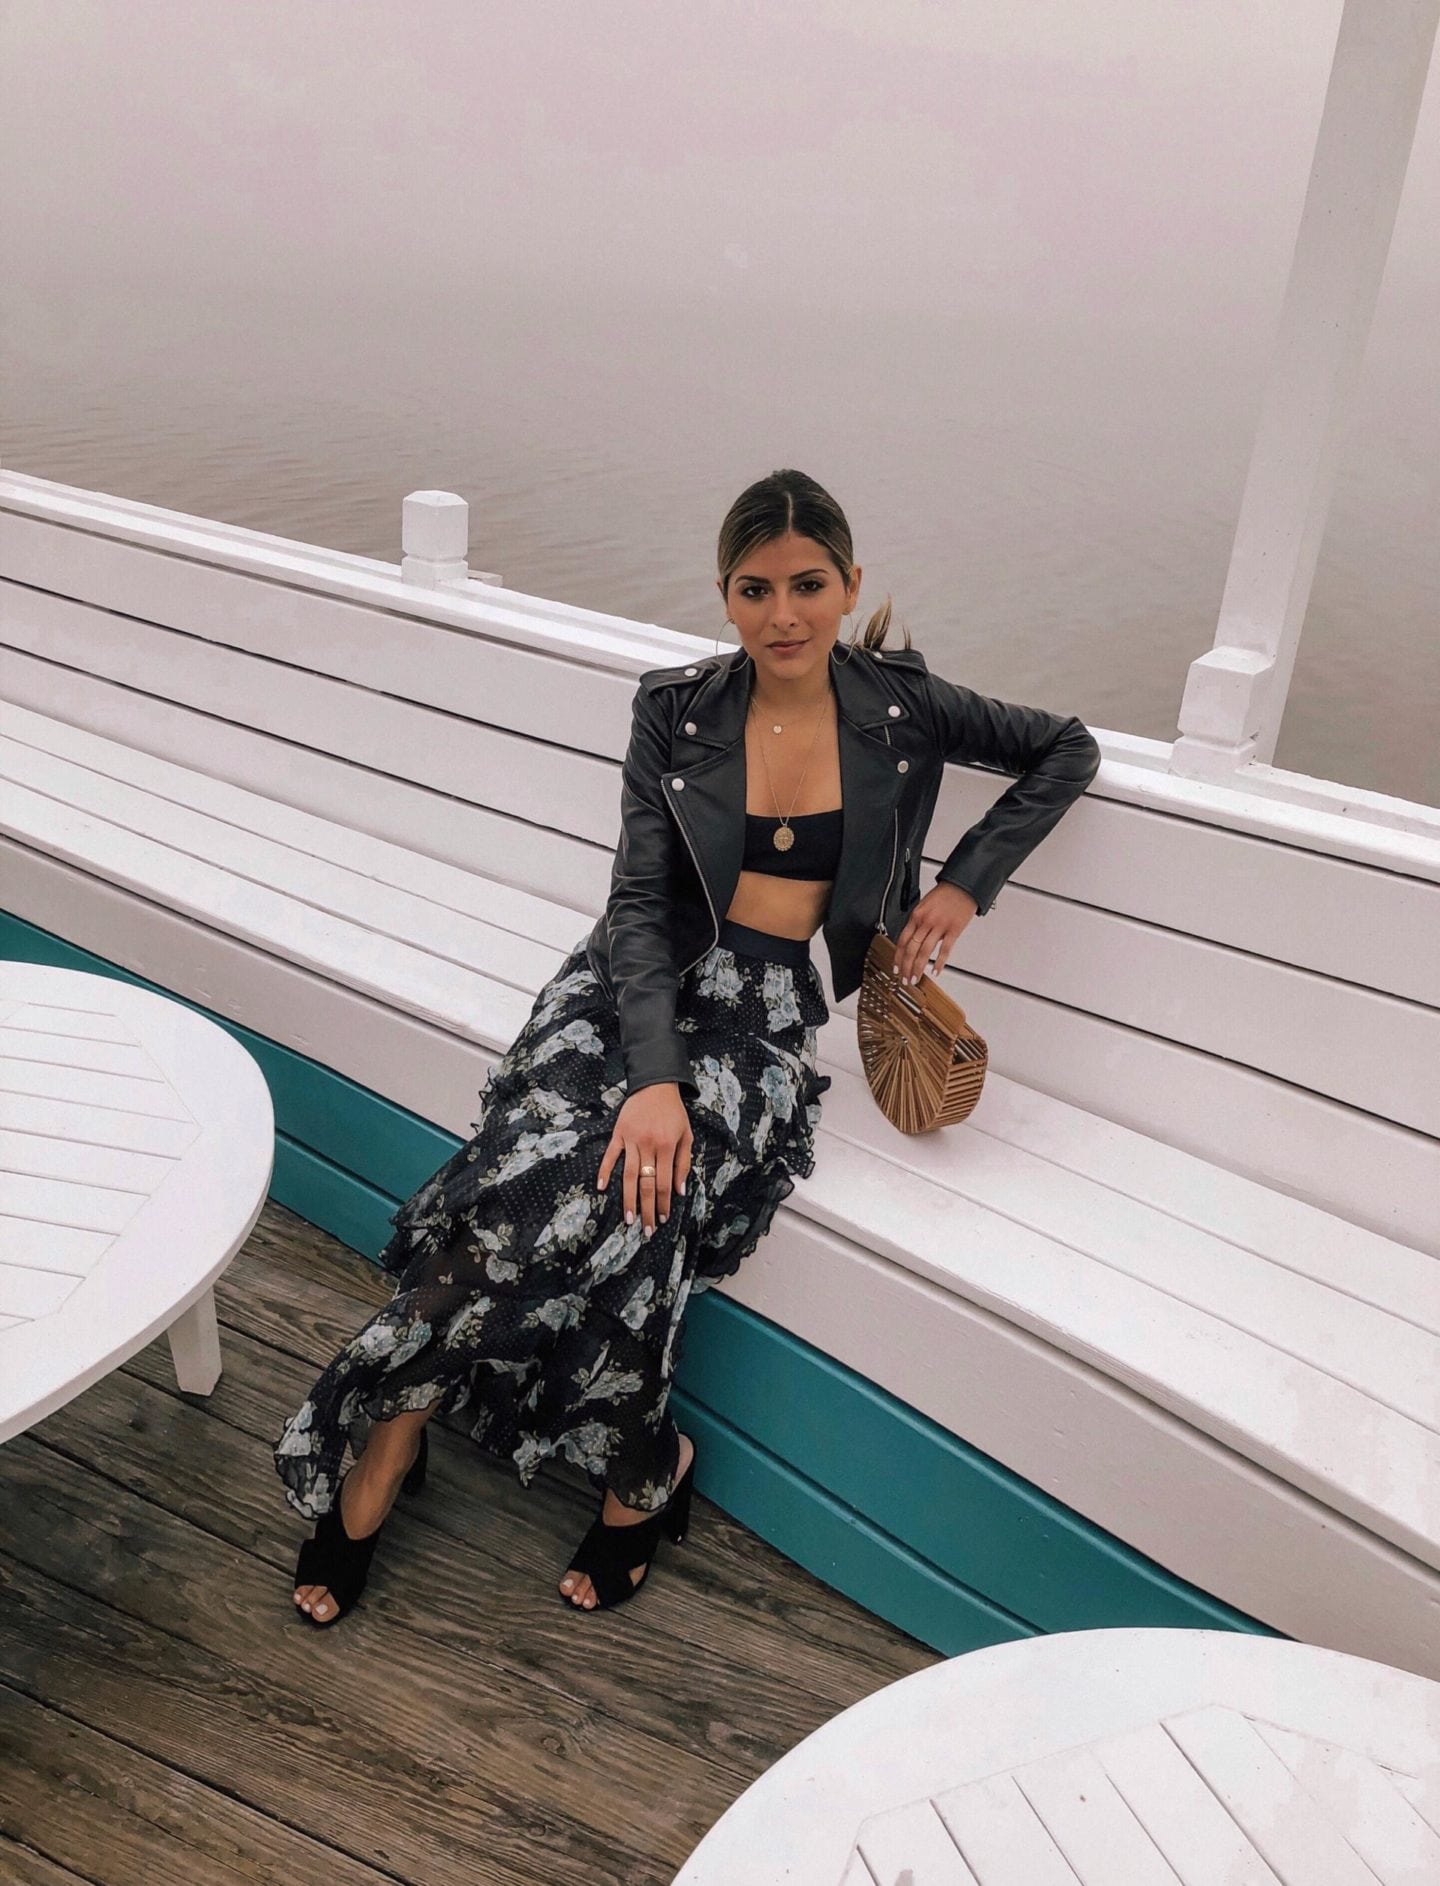 What to Wear to The Hamptons by Pam Hetlinger | Summer Fridays Hamptons Trip, Top LA Bloggers, Pam Hetlinger Style, Ruffle Maxi Skirt, Floral Maxi Skirt, Zimmerman Outfit, Chic Beach Look | TheGirlFromPanama.com